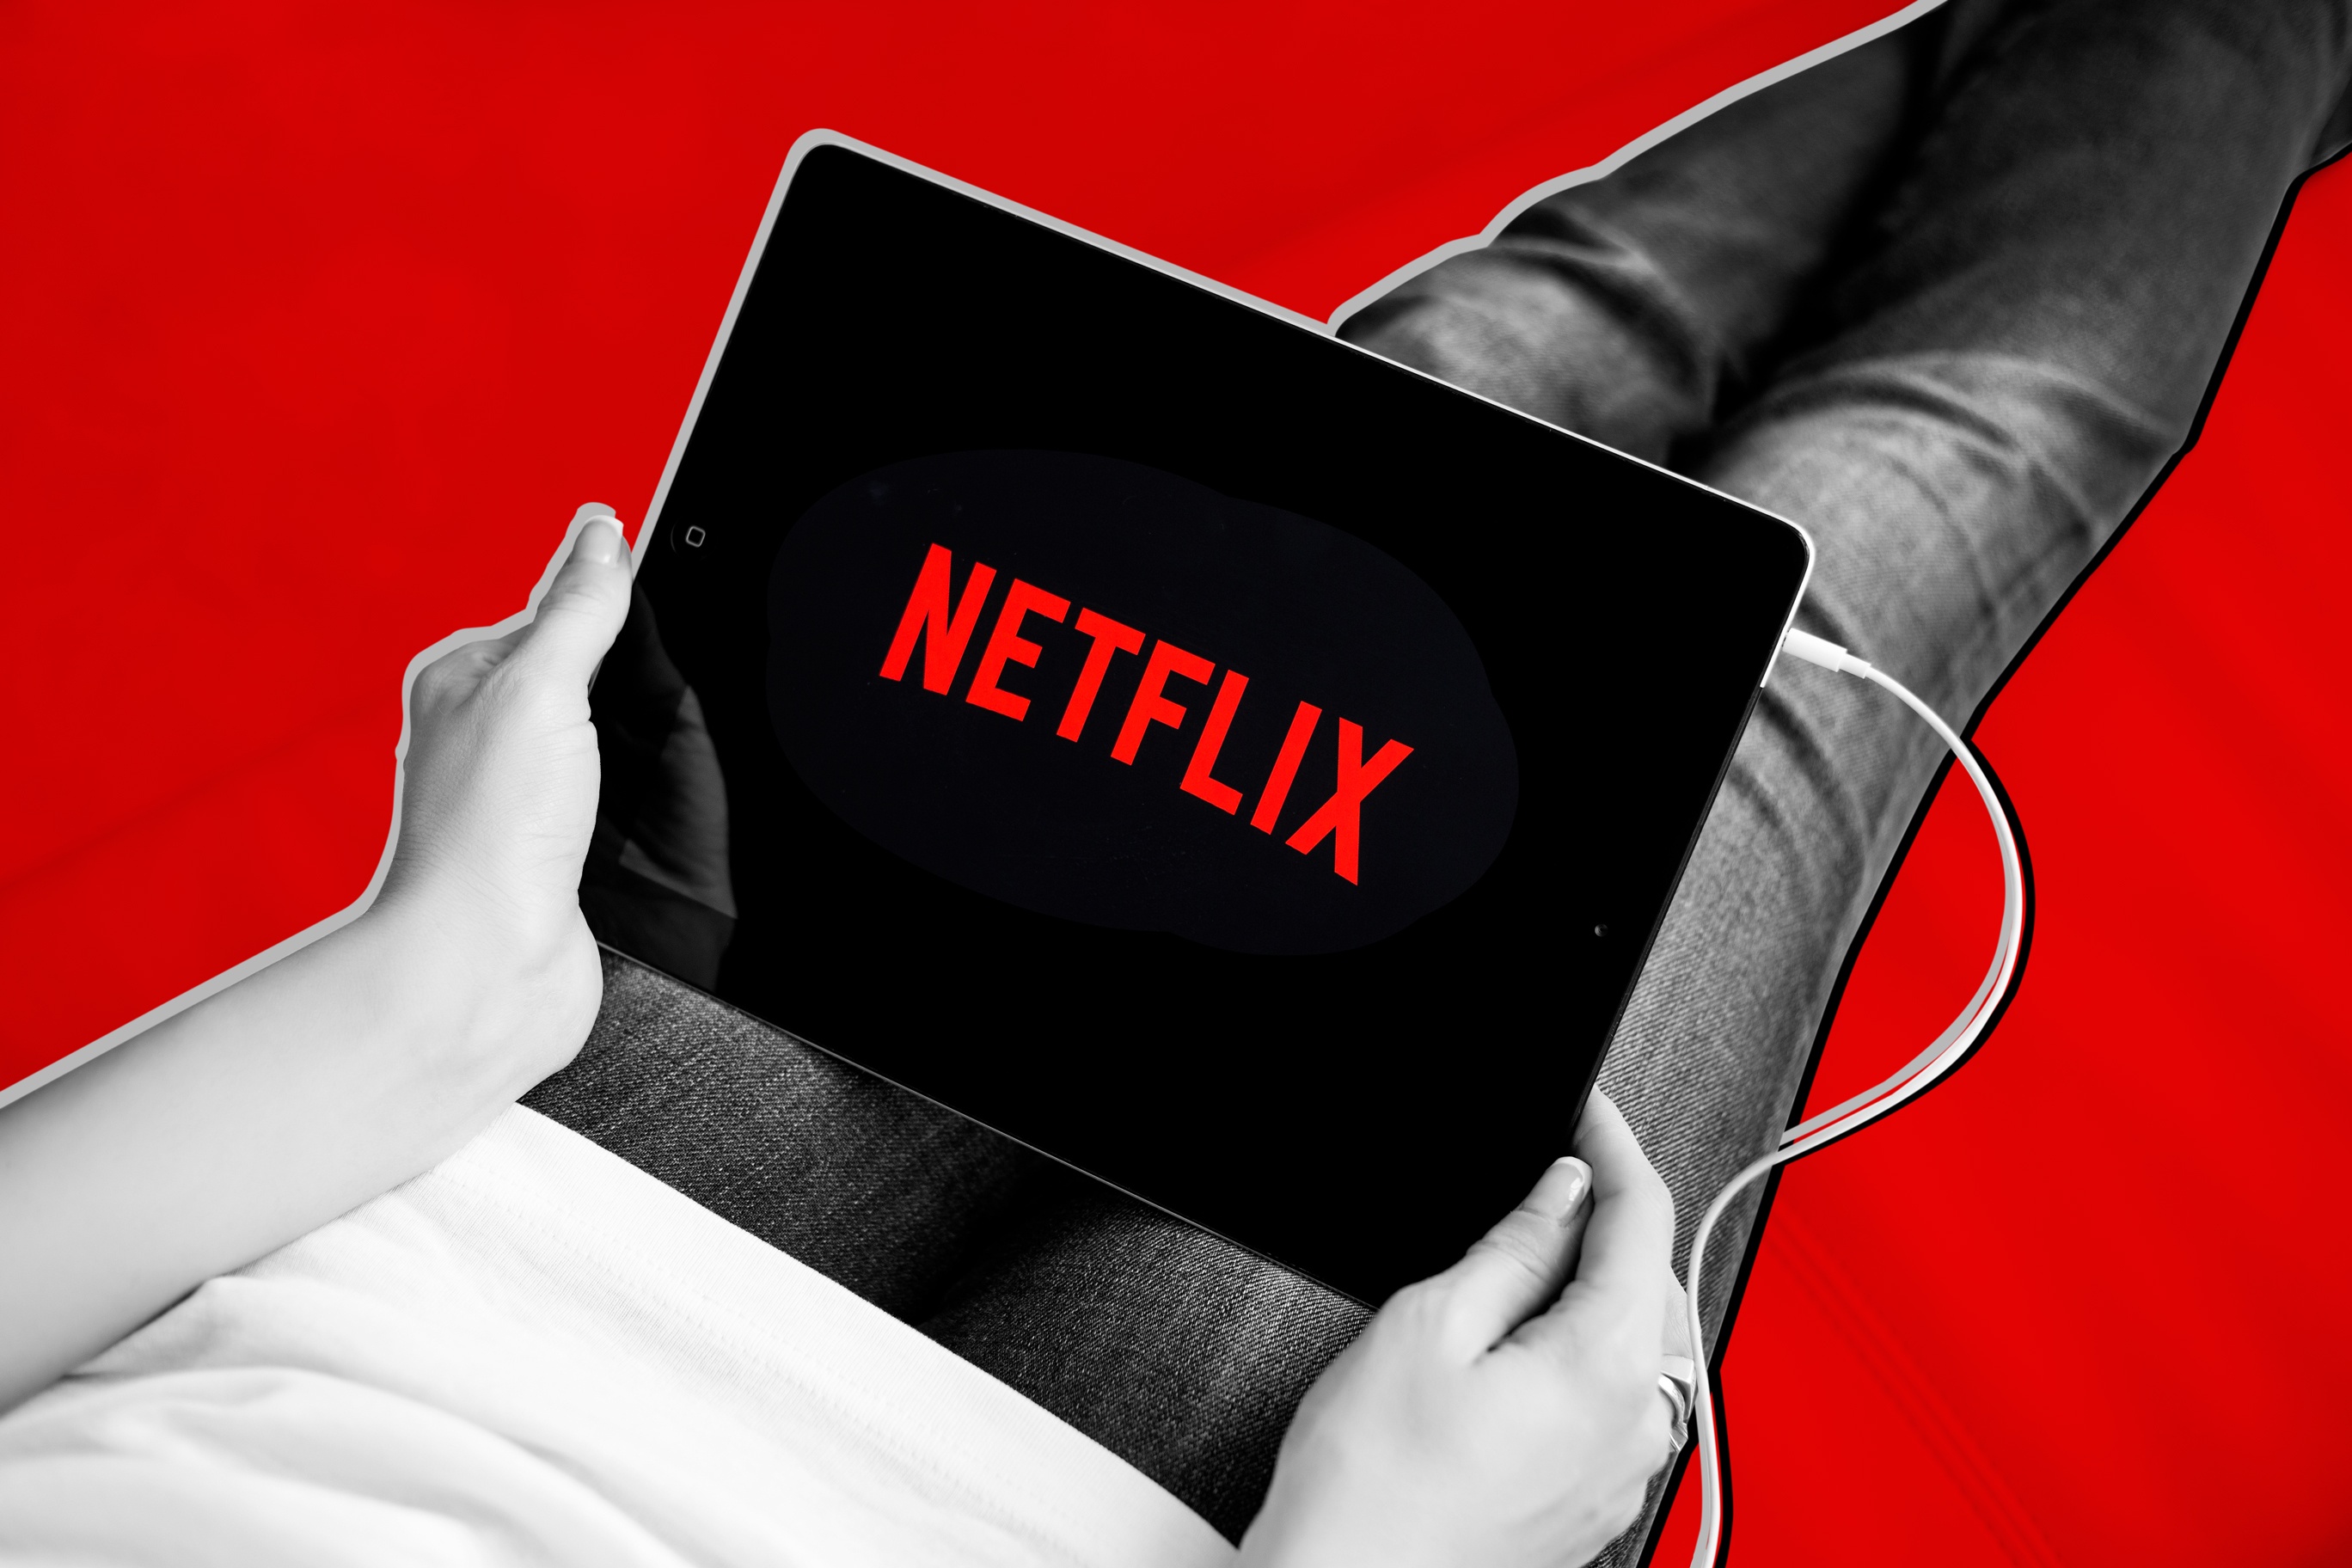 Netfilm Is Favored By Wall Street Analysts Again, As Morgan Stanley Even Sees A 30% Upside